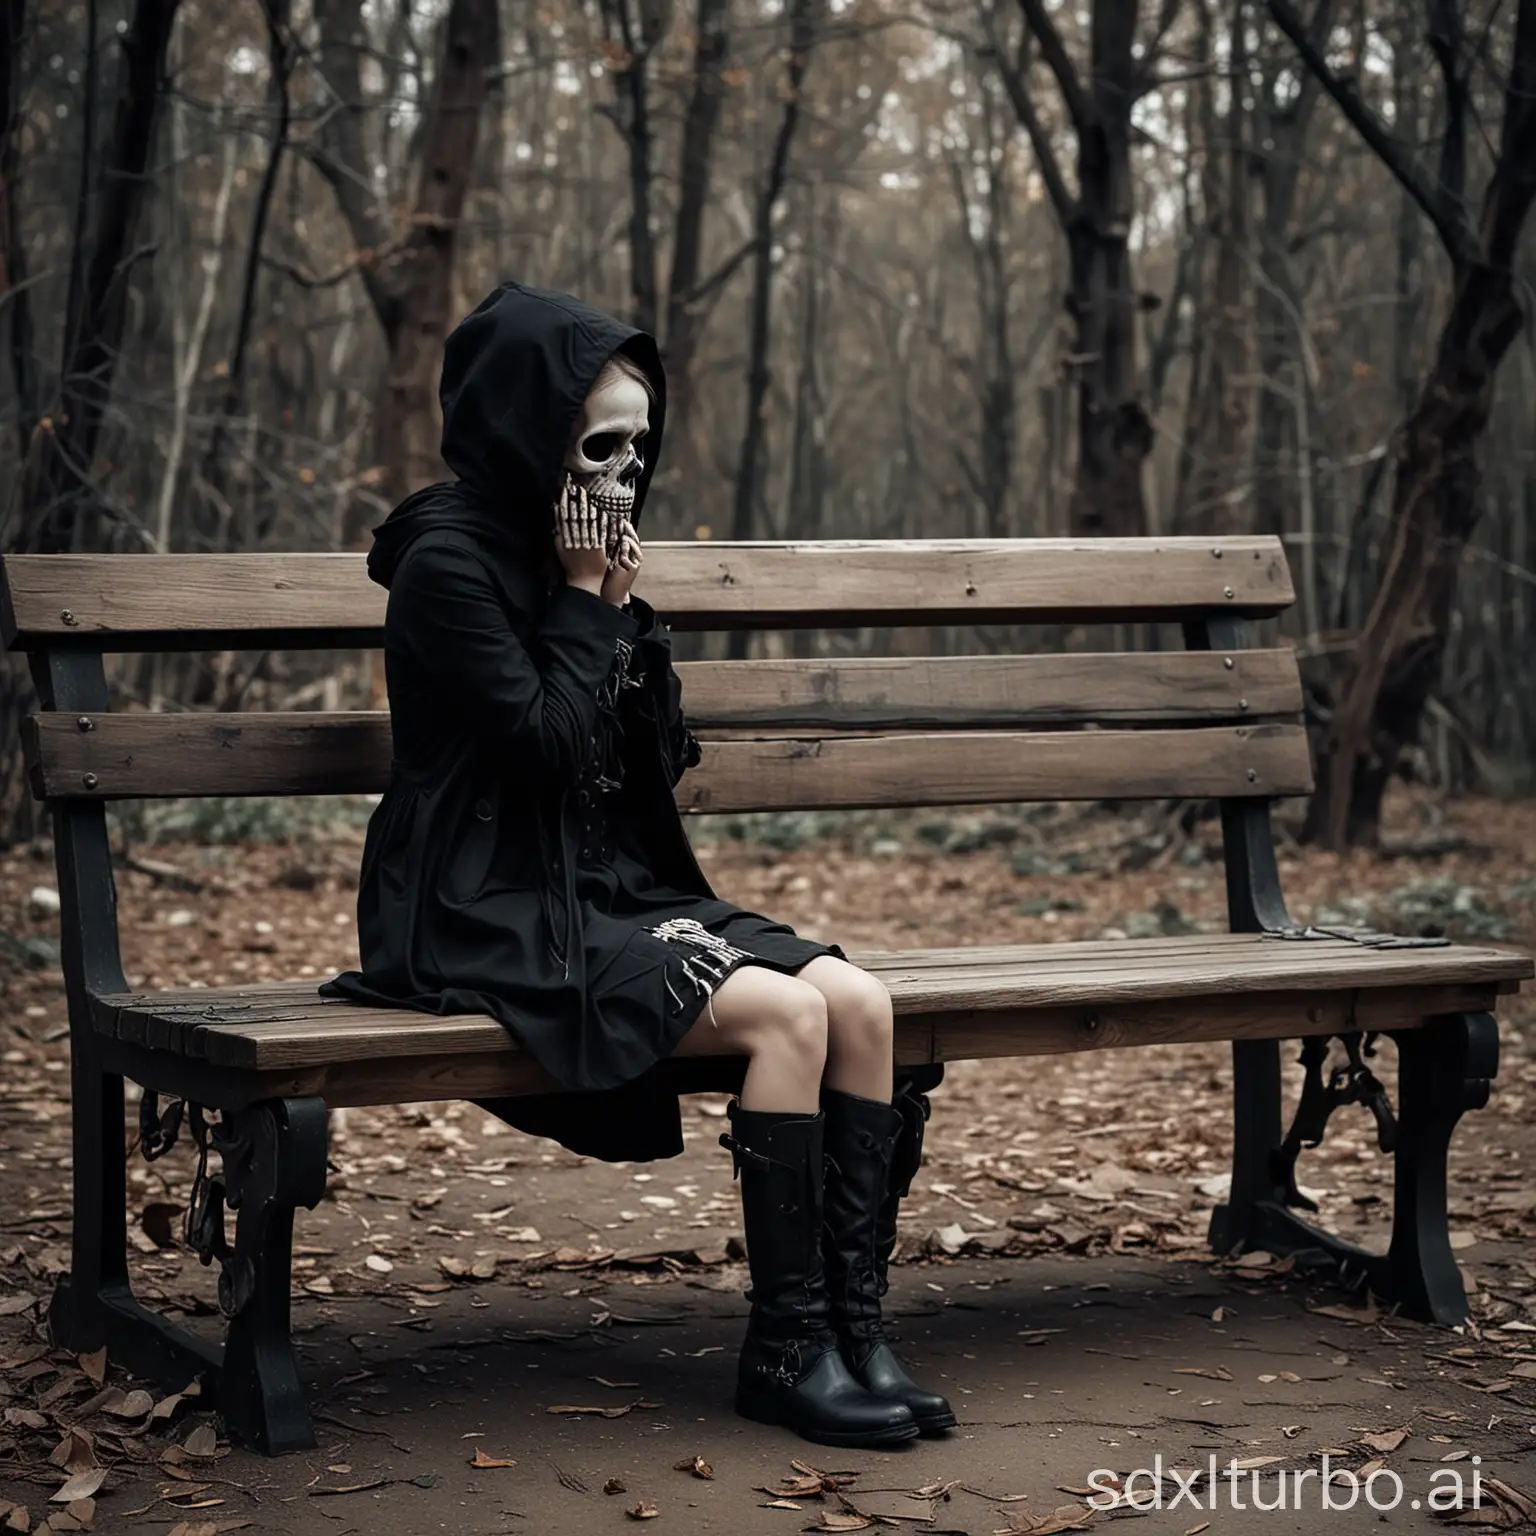 Photo of a girl sitting on a backless wooden bench, sad with her hands on her face as if crying; next to her, sitting on the same bench, as if mounted, with one leg on the bench, a sinister skeleton wearing boots, black pants and a black coat with a hood looking at the girl. Cinematic photography.